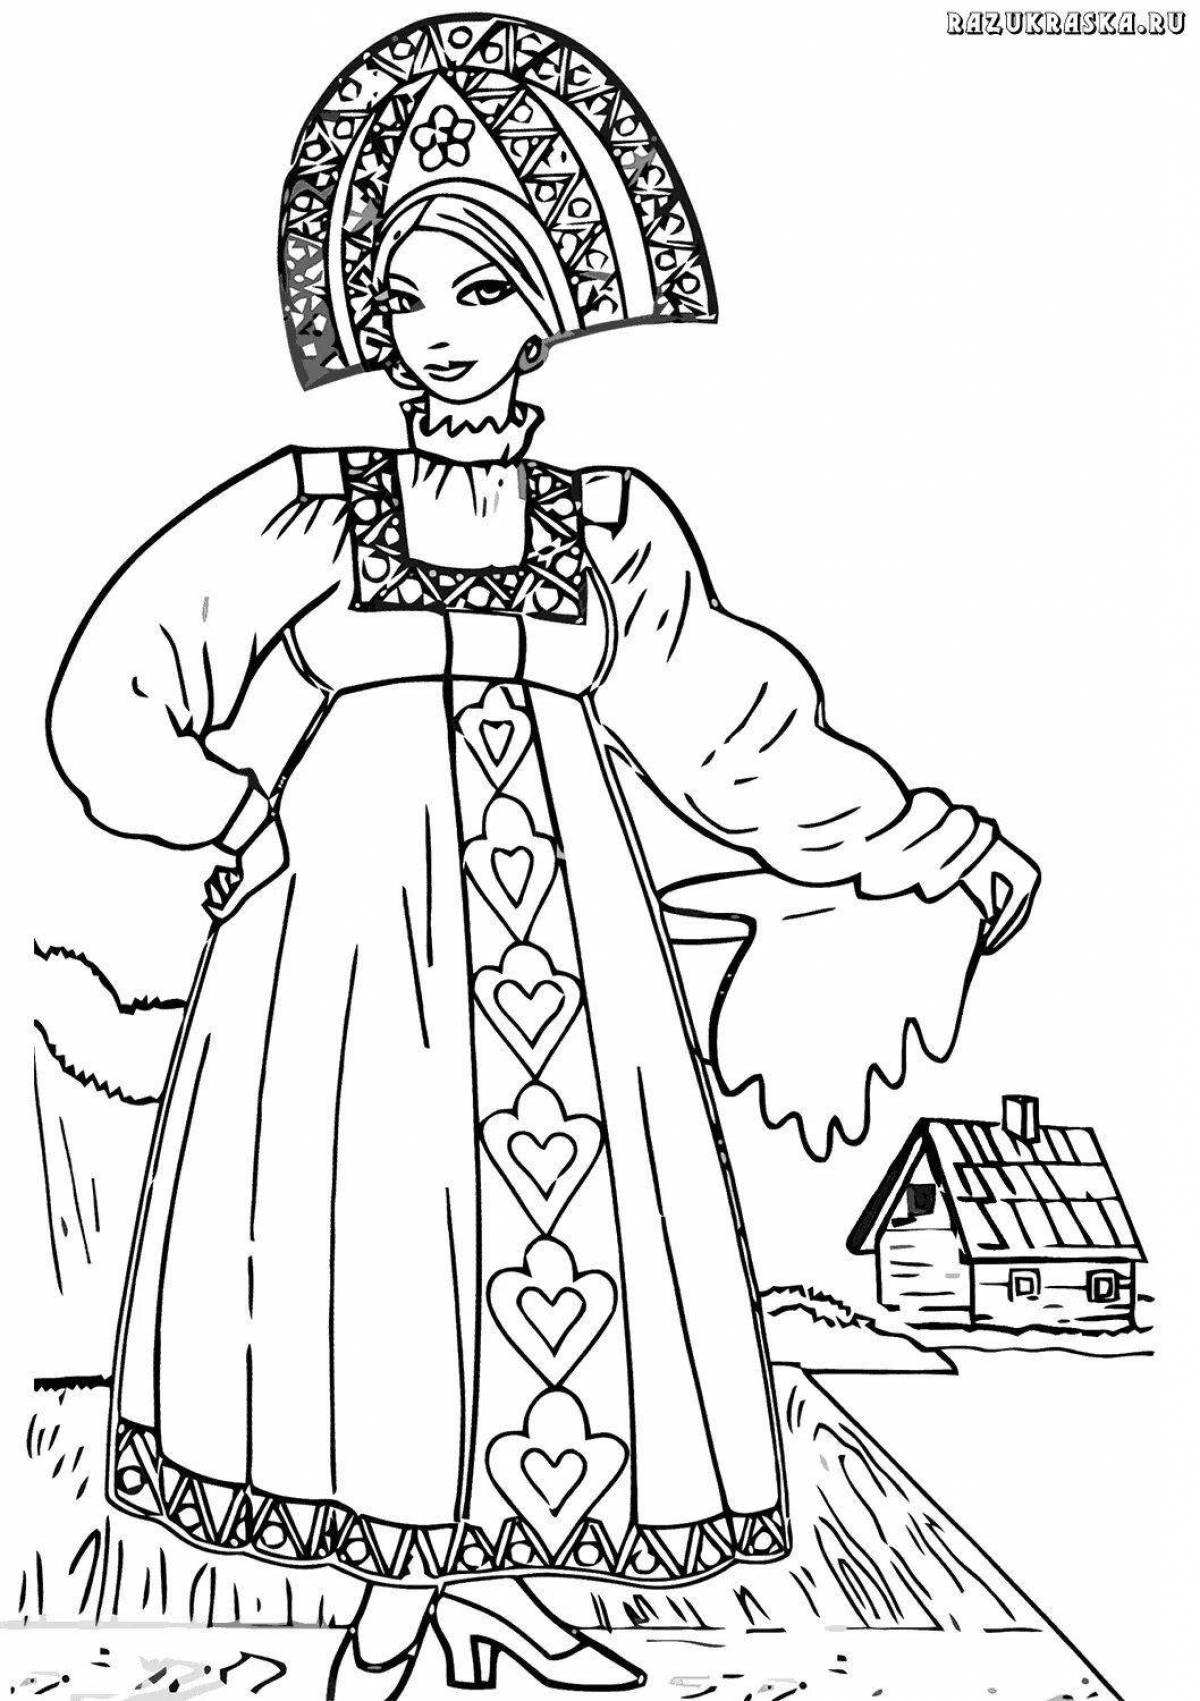 A fascinating Russian folk costume with a pattern